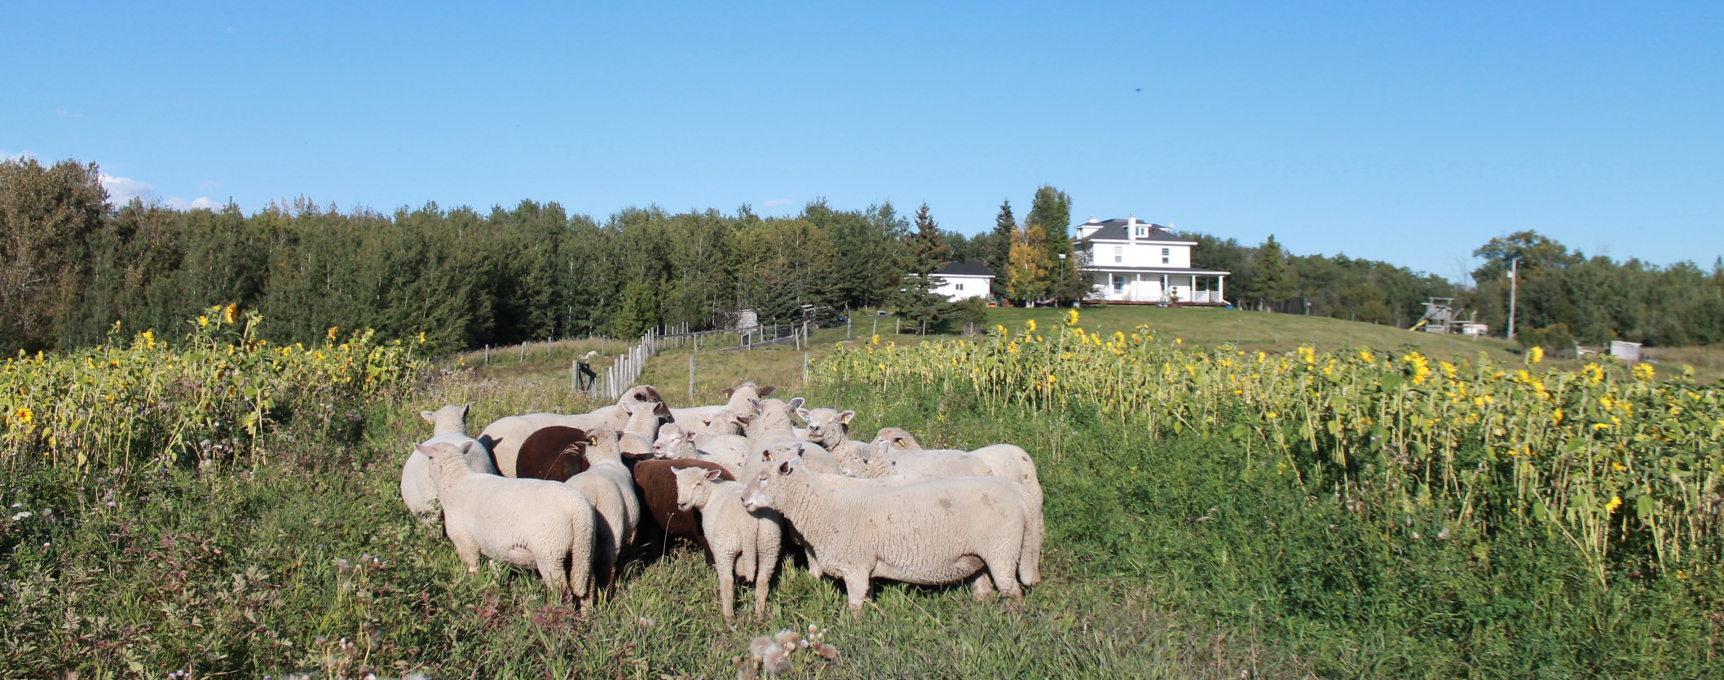 Image of the lambs of Wildflower bride farms